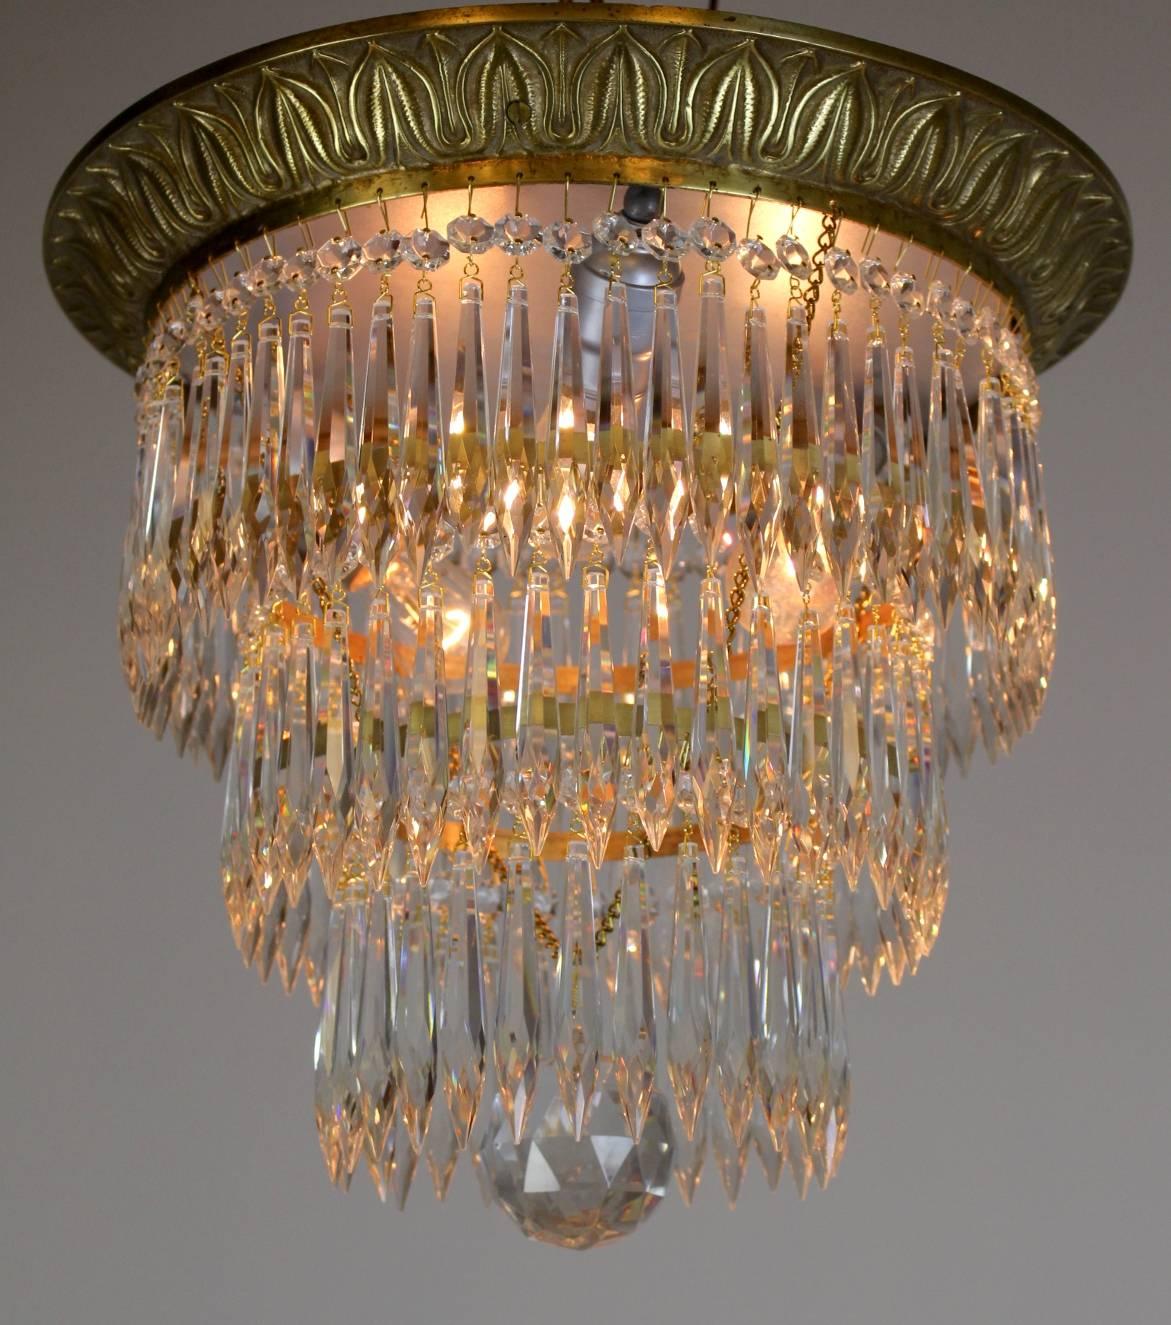 High quality cast brass rimmed crystal flush mount, made circa 1915.

Classical Revival / Beaux Arts in Style, This gorgeous fixture boasts three tiers of cut crystals and a large central cut ball.

Finished in a rich Satin gold